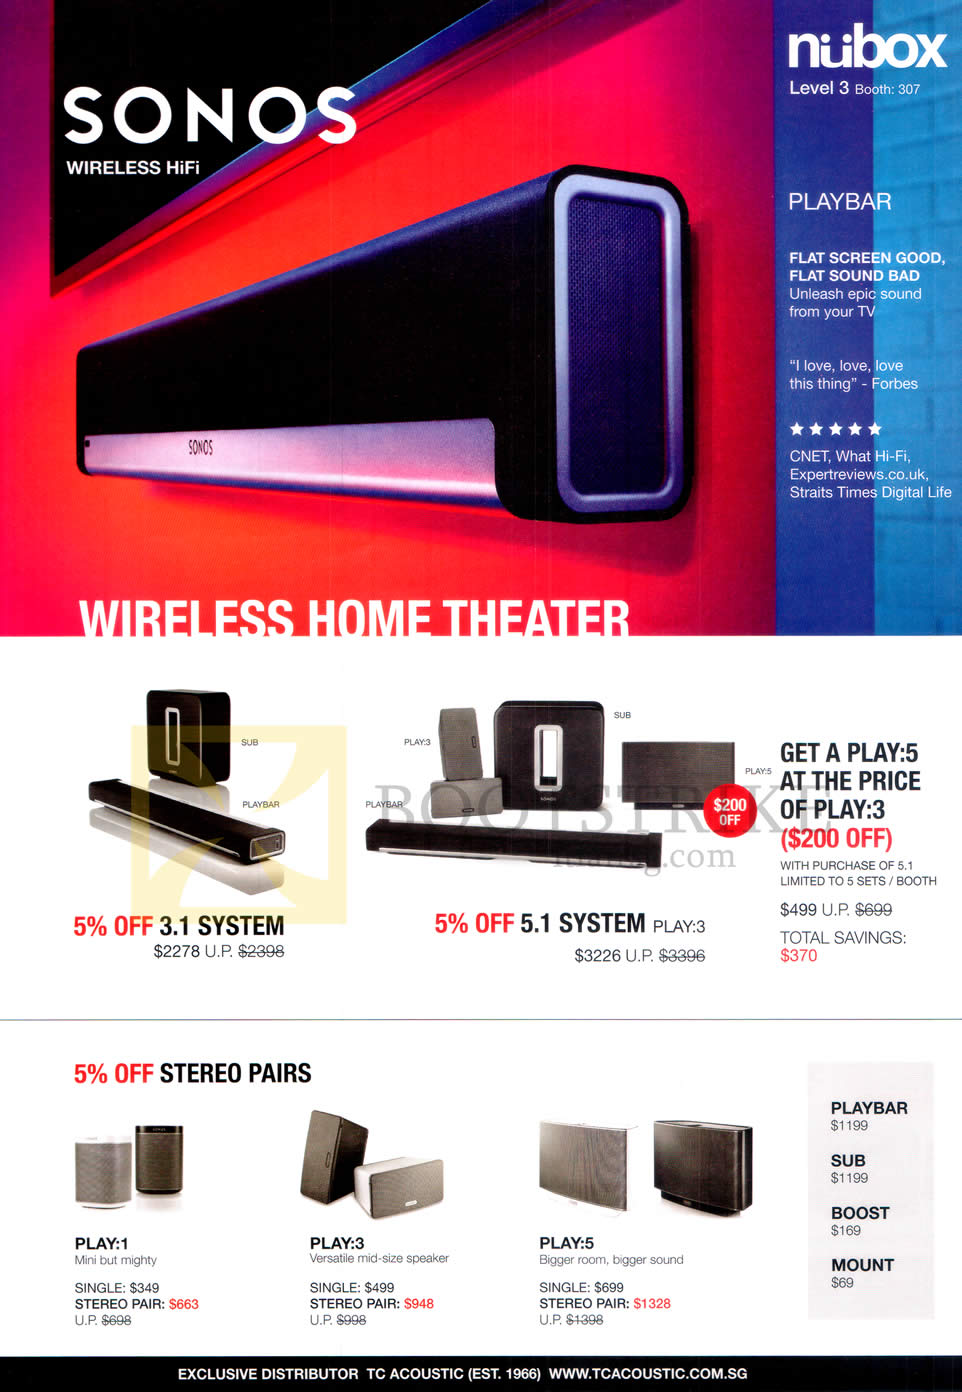 IT SHOW 2015 price list image brochure of Nubox Sonos Home Theatre Systems 3.1 System, 5.1 System, Play 1, 3, 5, Playbar